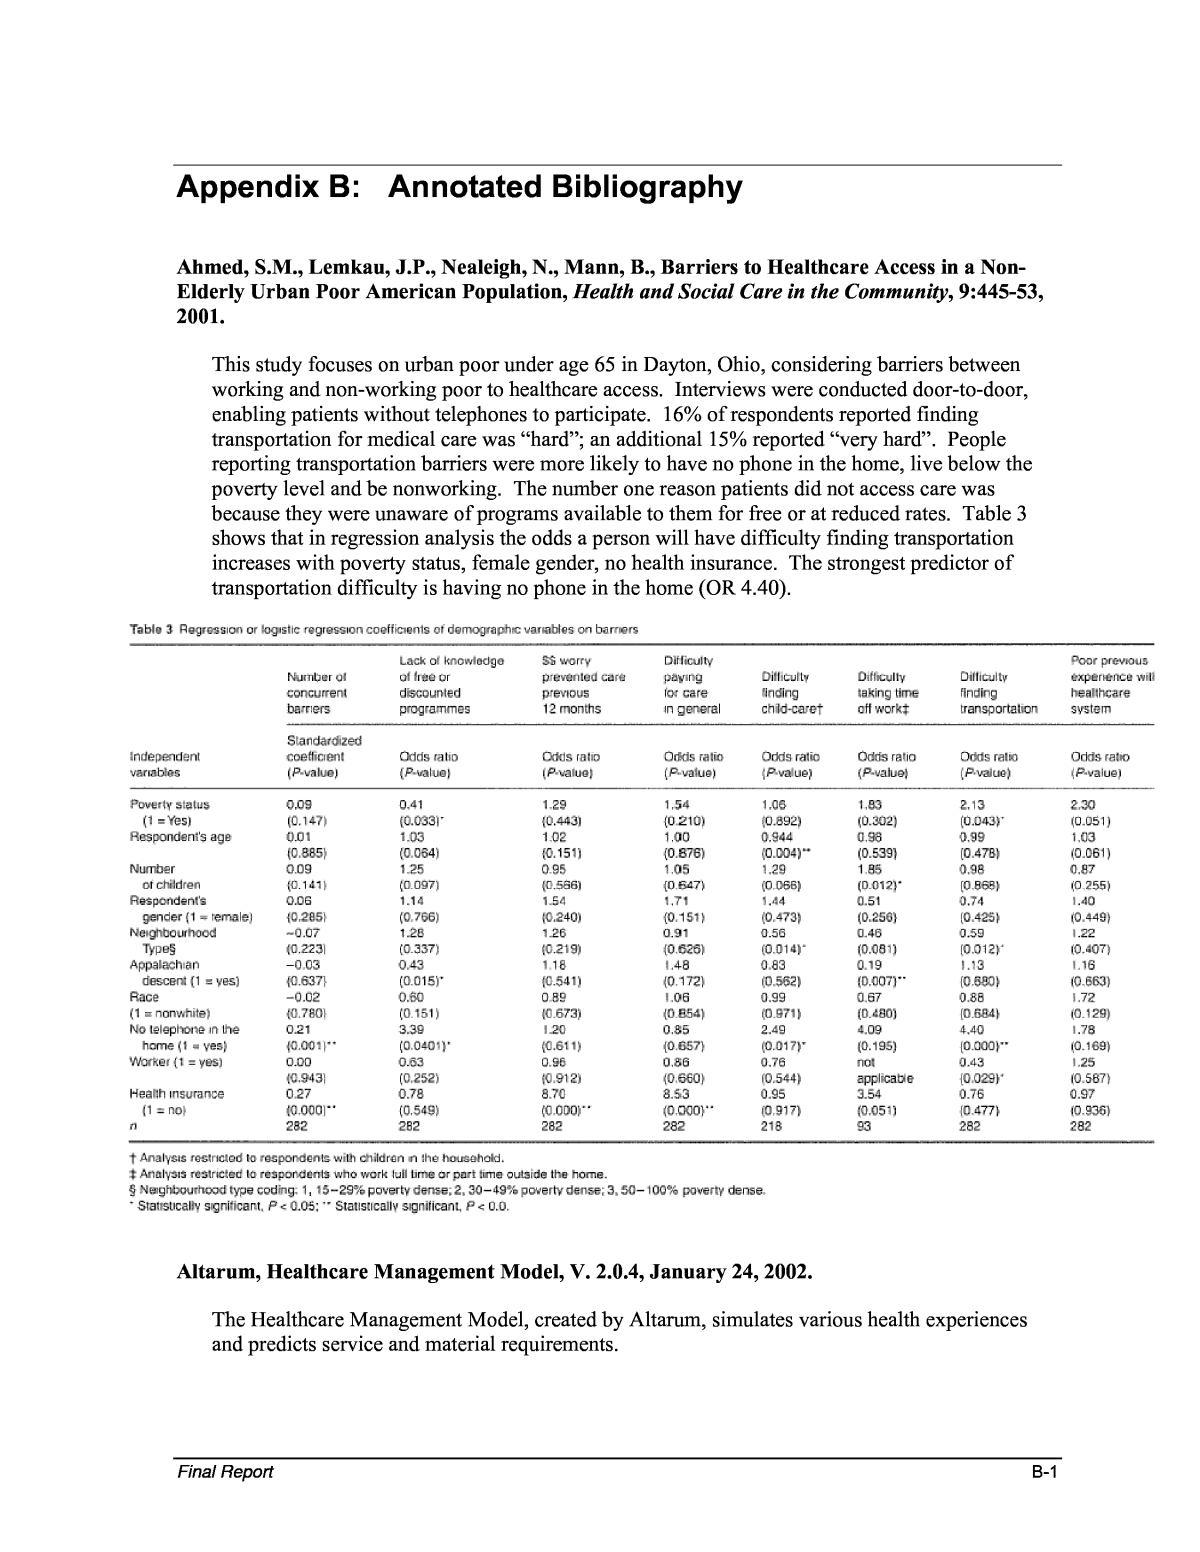 Appendix B Annotated Bibliography Cost-Benefit Analysis of Providing Non-Emergency Medical Transportation The National Academies Press picture